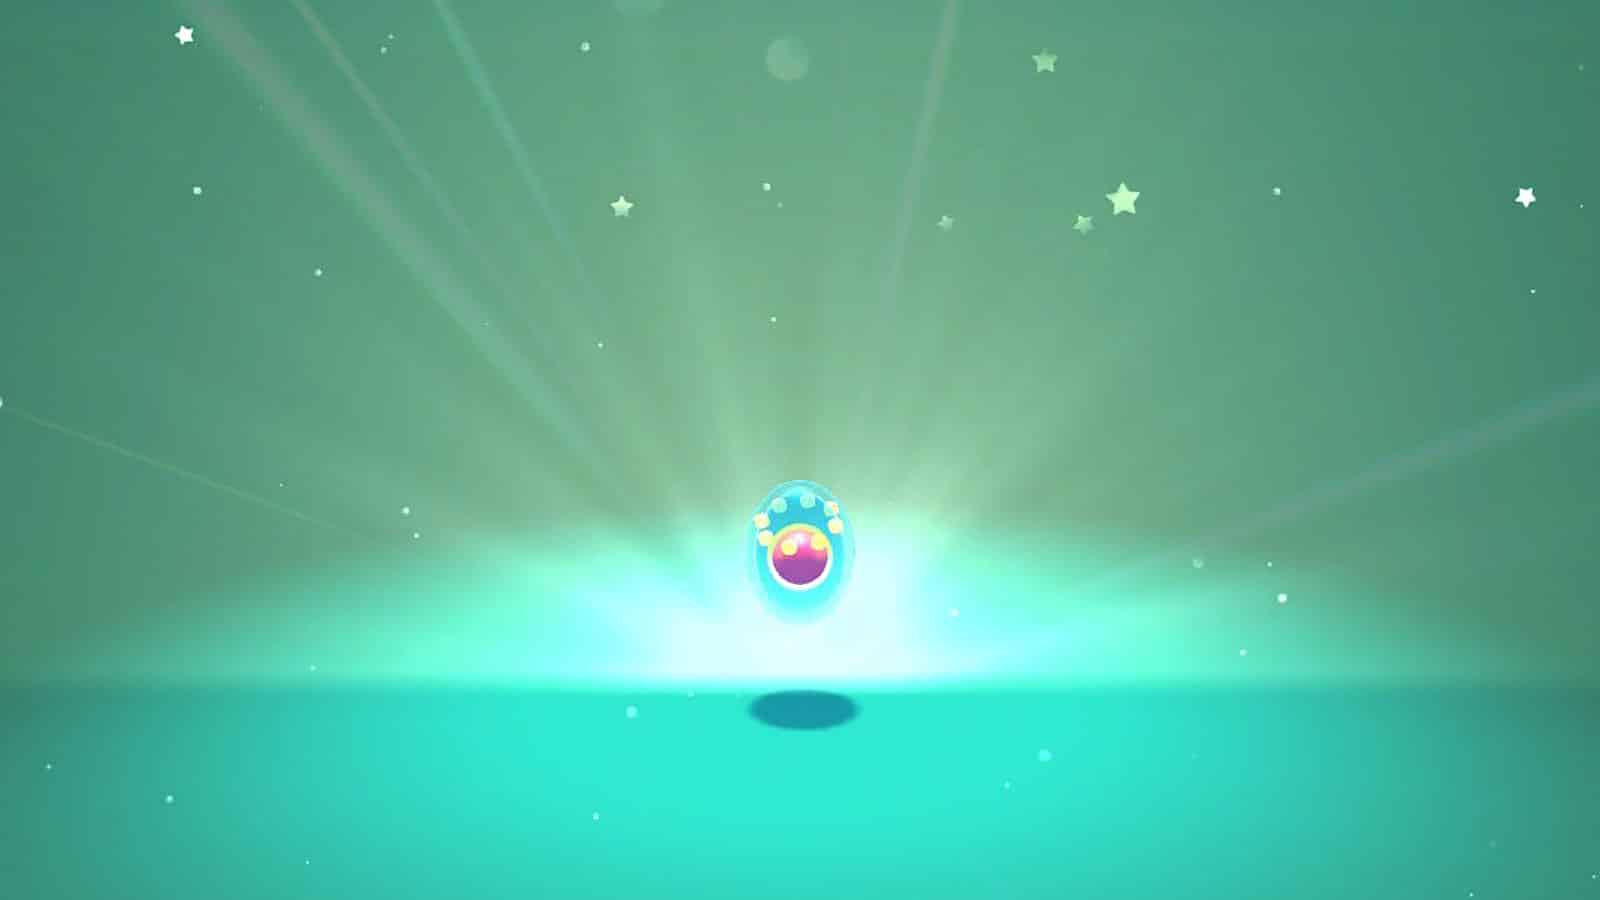 An image of the Manaphy egg Mystery Gift in Pokemon Brilliant Diamond & Shining Pearl